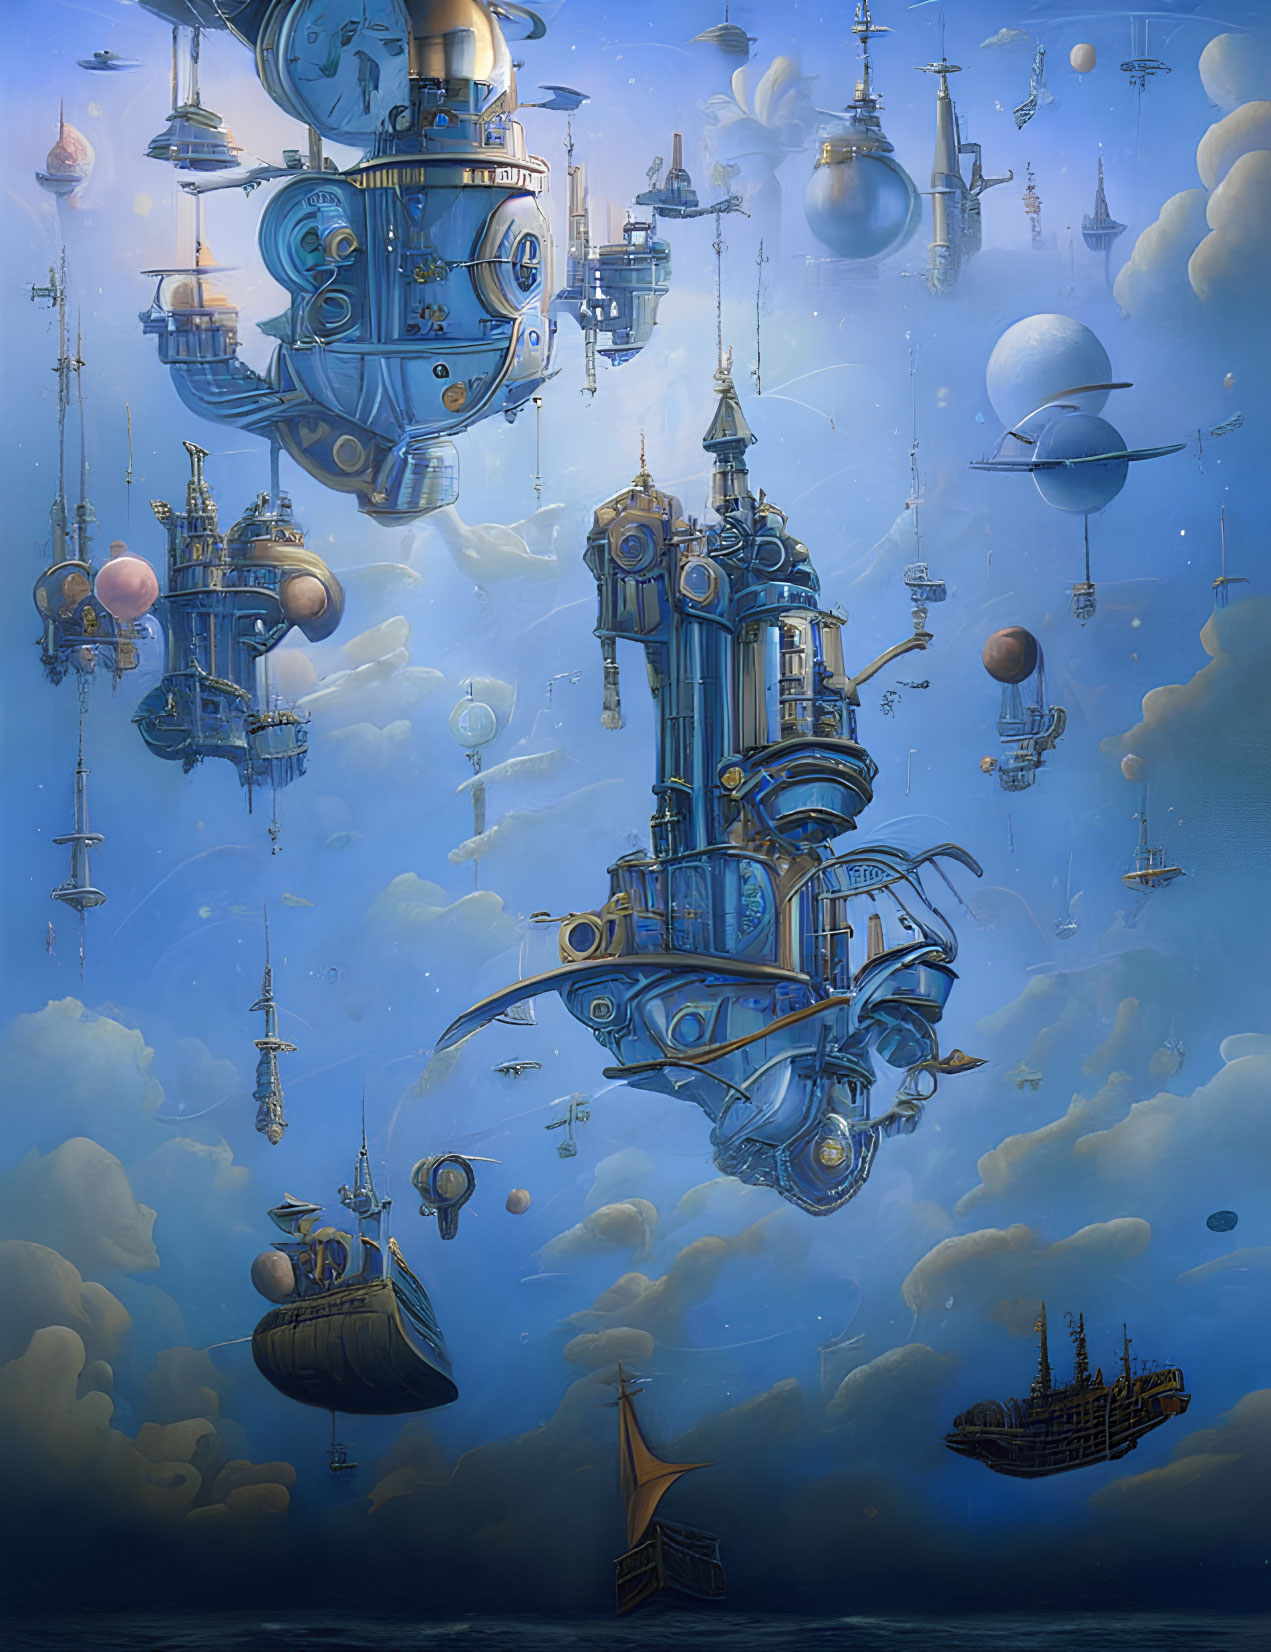 Fantasy scene with steampunk airships in blue sky